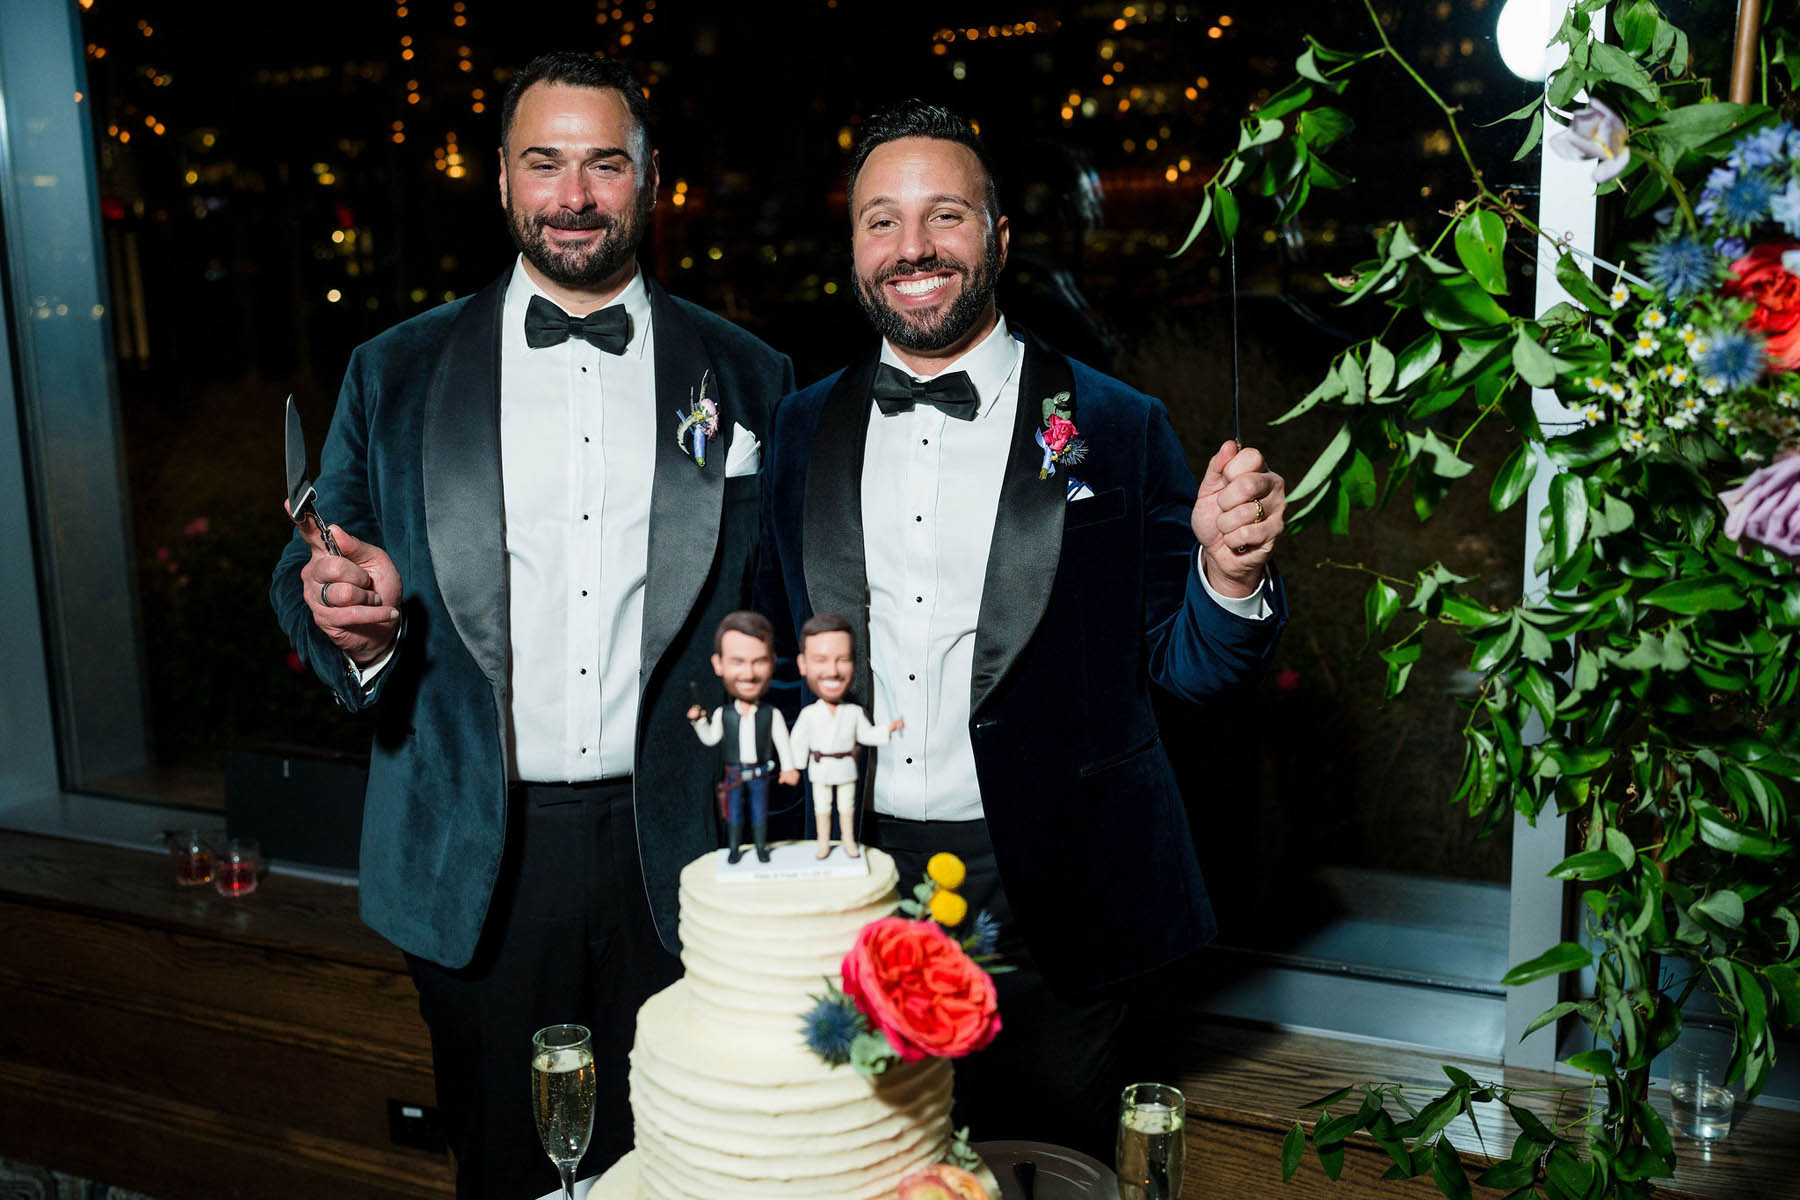 The grooms stand behind their wedding cake, which has a Star Wars cake topper on it that looks like them. They pose like the figurines, smiling.